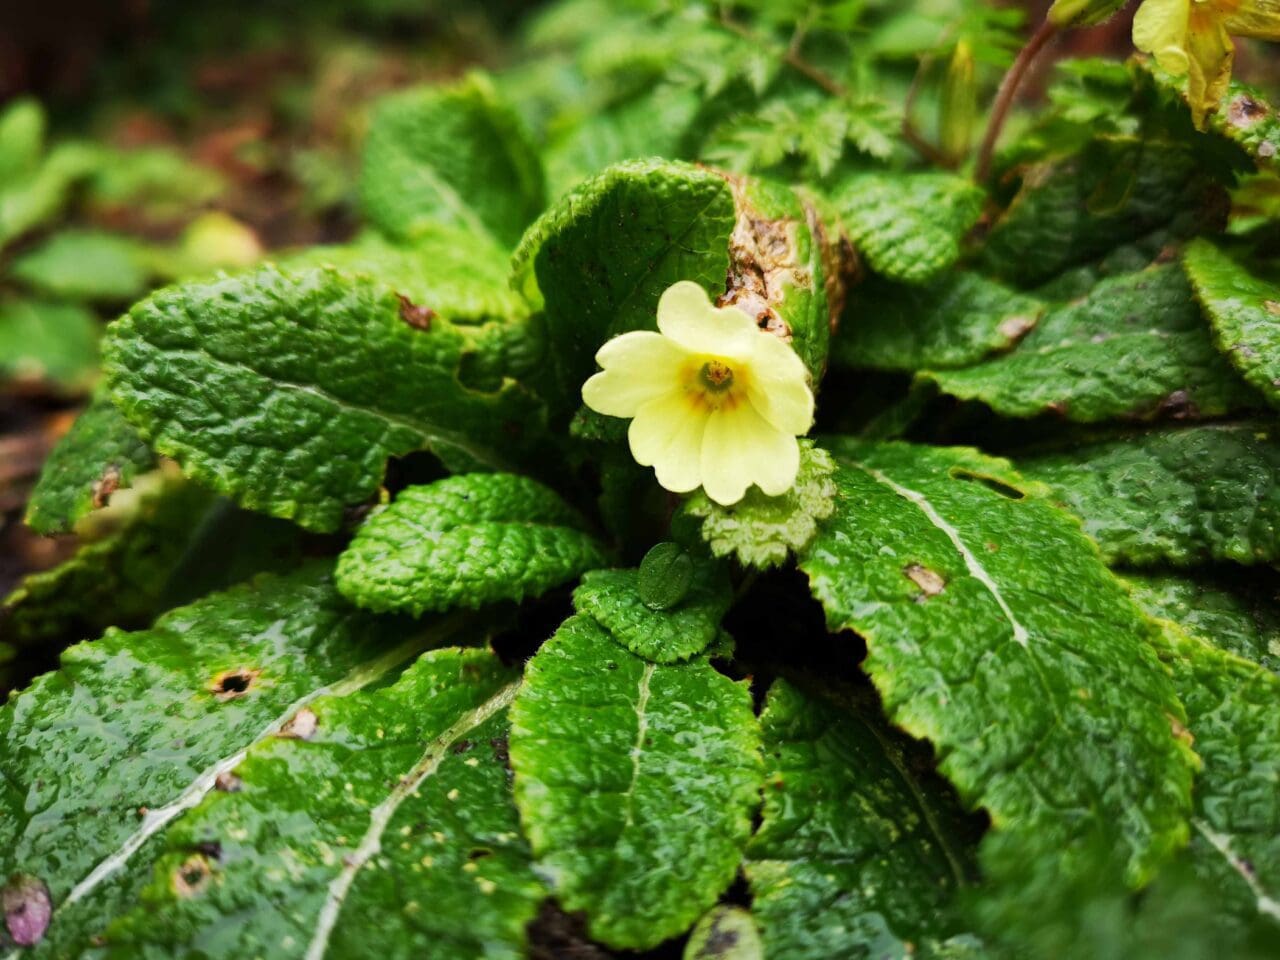 2. The first of two Primroses flowering in the garden.